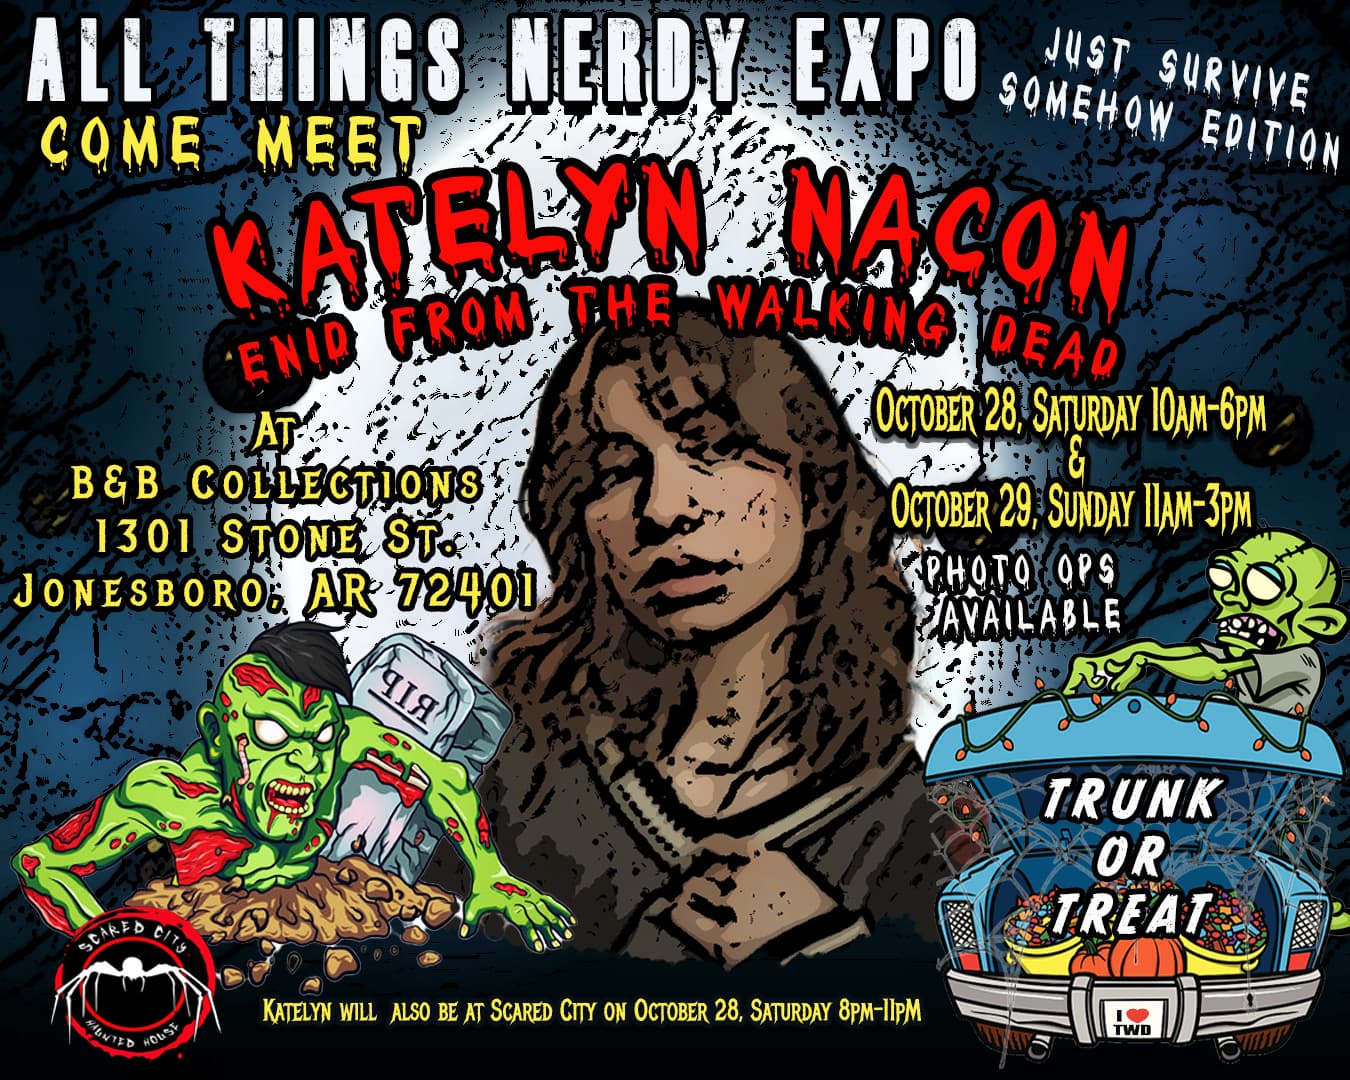 All Things Nerdy Expo: Trunk or Treat featuring special guest Katelyn Nacon